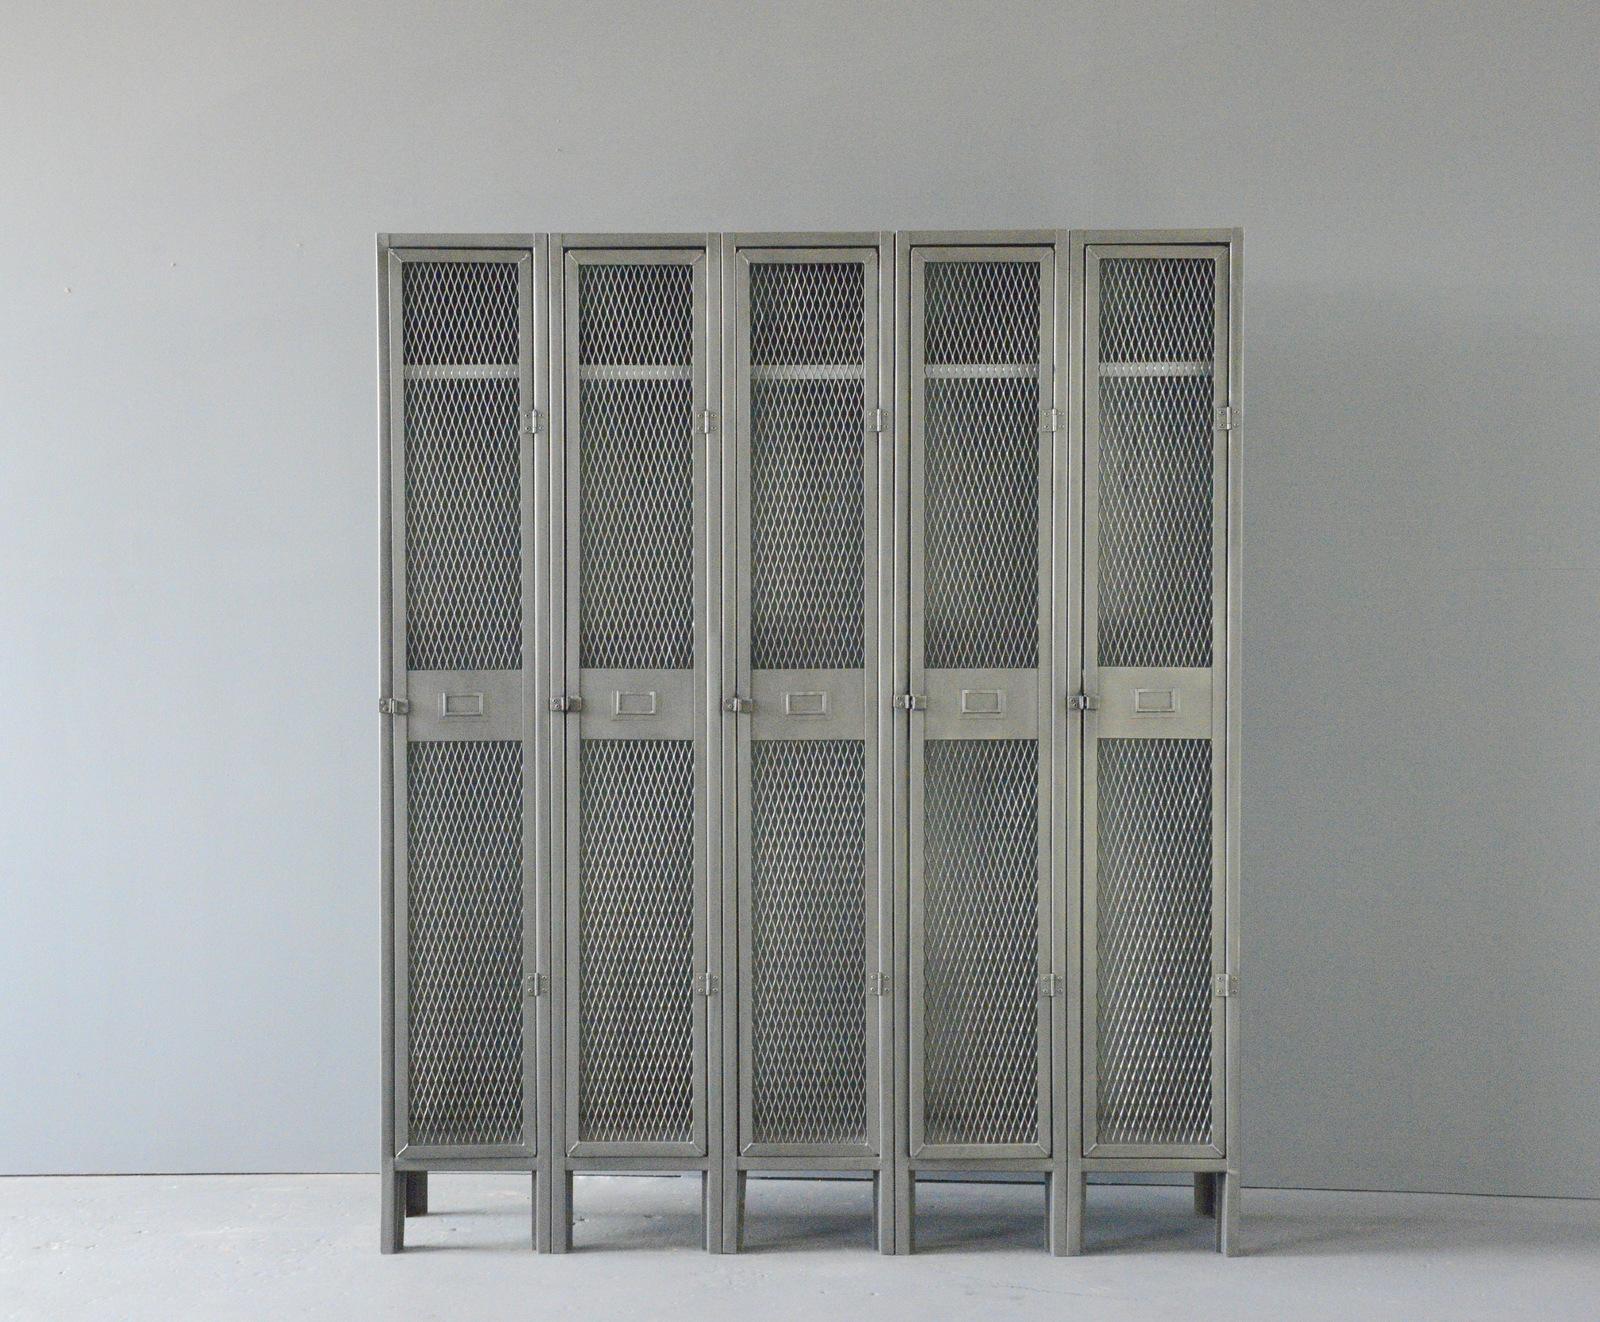 English Industrial Lockers, circa 1940s

- Sheet steel with mesh front doors
- 5 Doors
- Each compartment has hanging hooks and shelf
- Salvaged from an engineering works in Birmingham
- English ~ 1940s
- 154cm wide x 31cm deep x 182cm